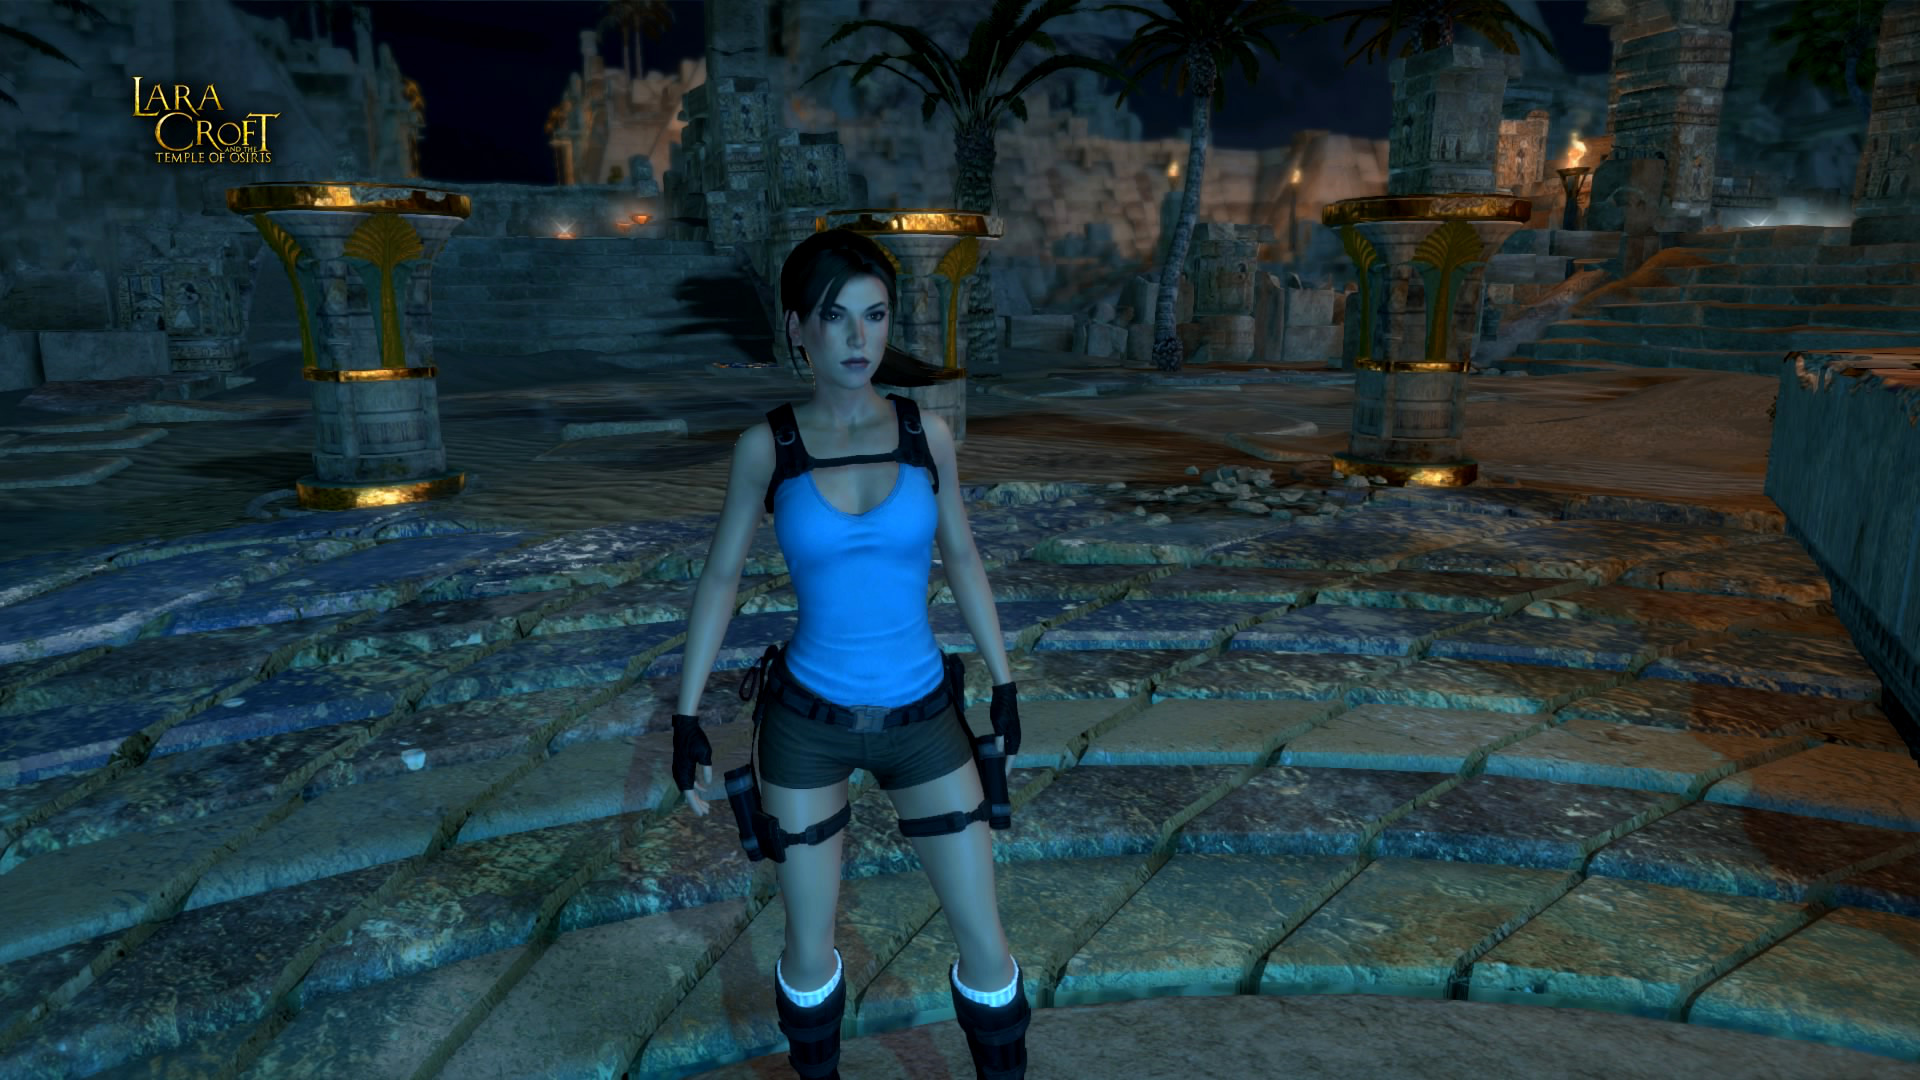 Lara Croft And The Temple Of Osiris Backgrounds, Compatible - PC, Mobile, Gadgets| 1920x1080 px